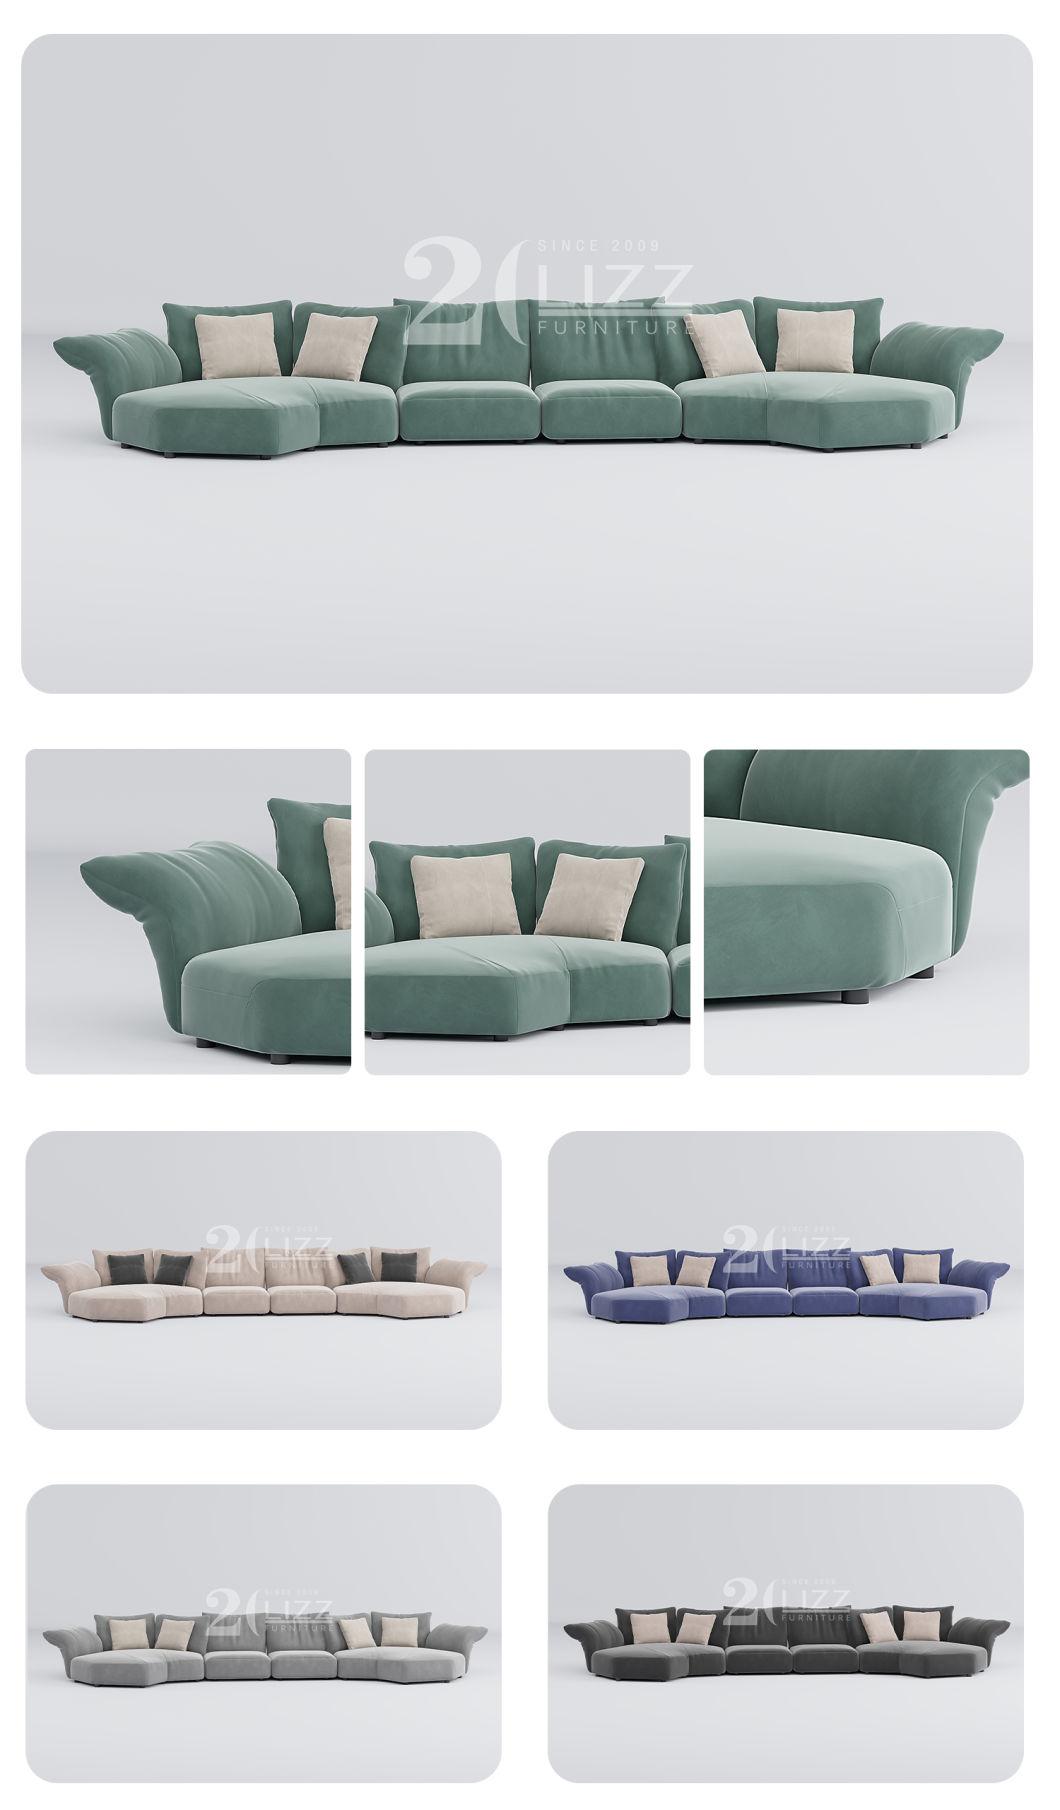 Modern Luxury Home Furniture Set Leisure Sectional Fabric Sofa Luxury Italian Long Couch